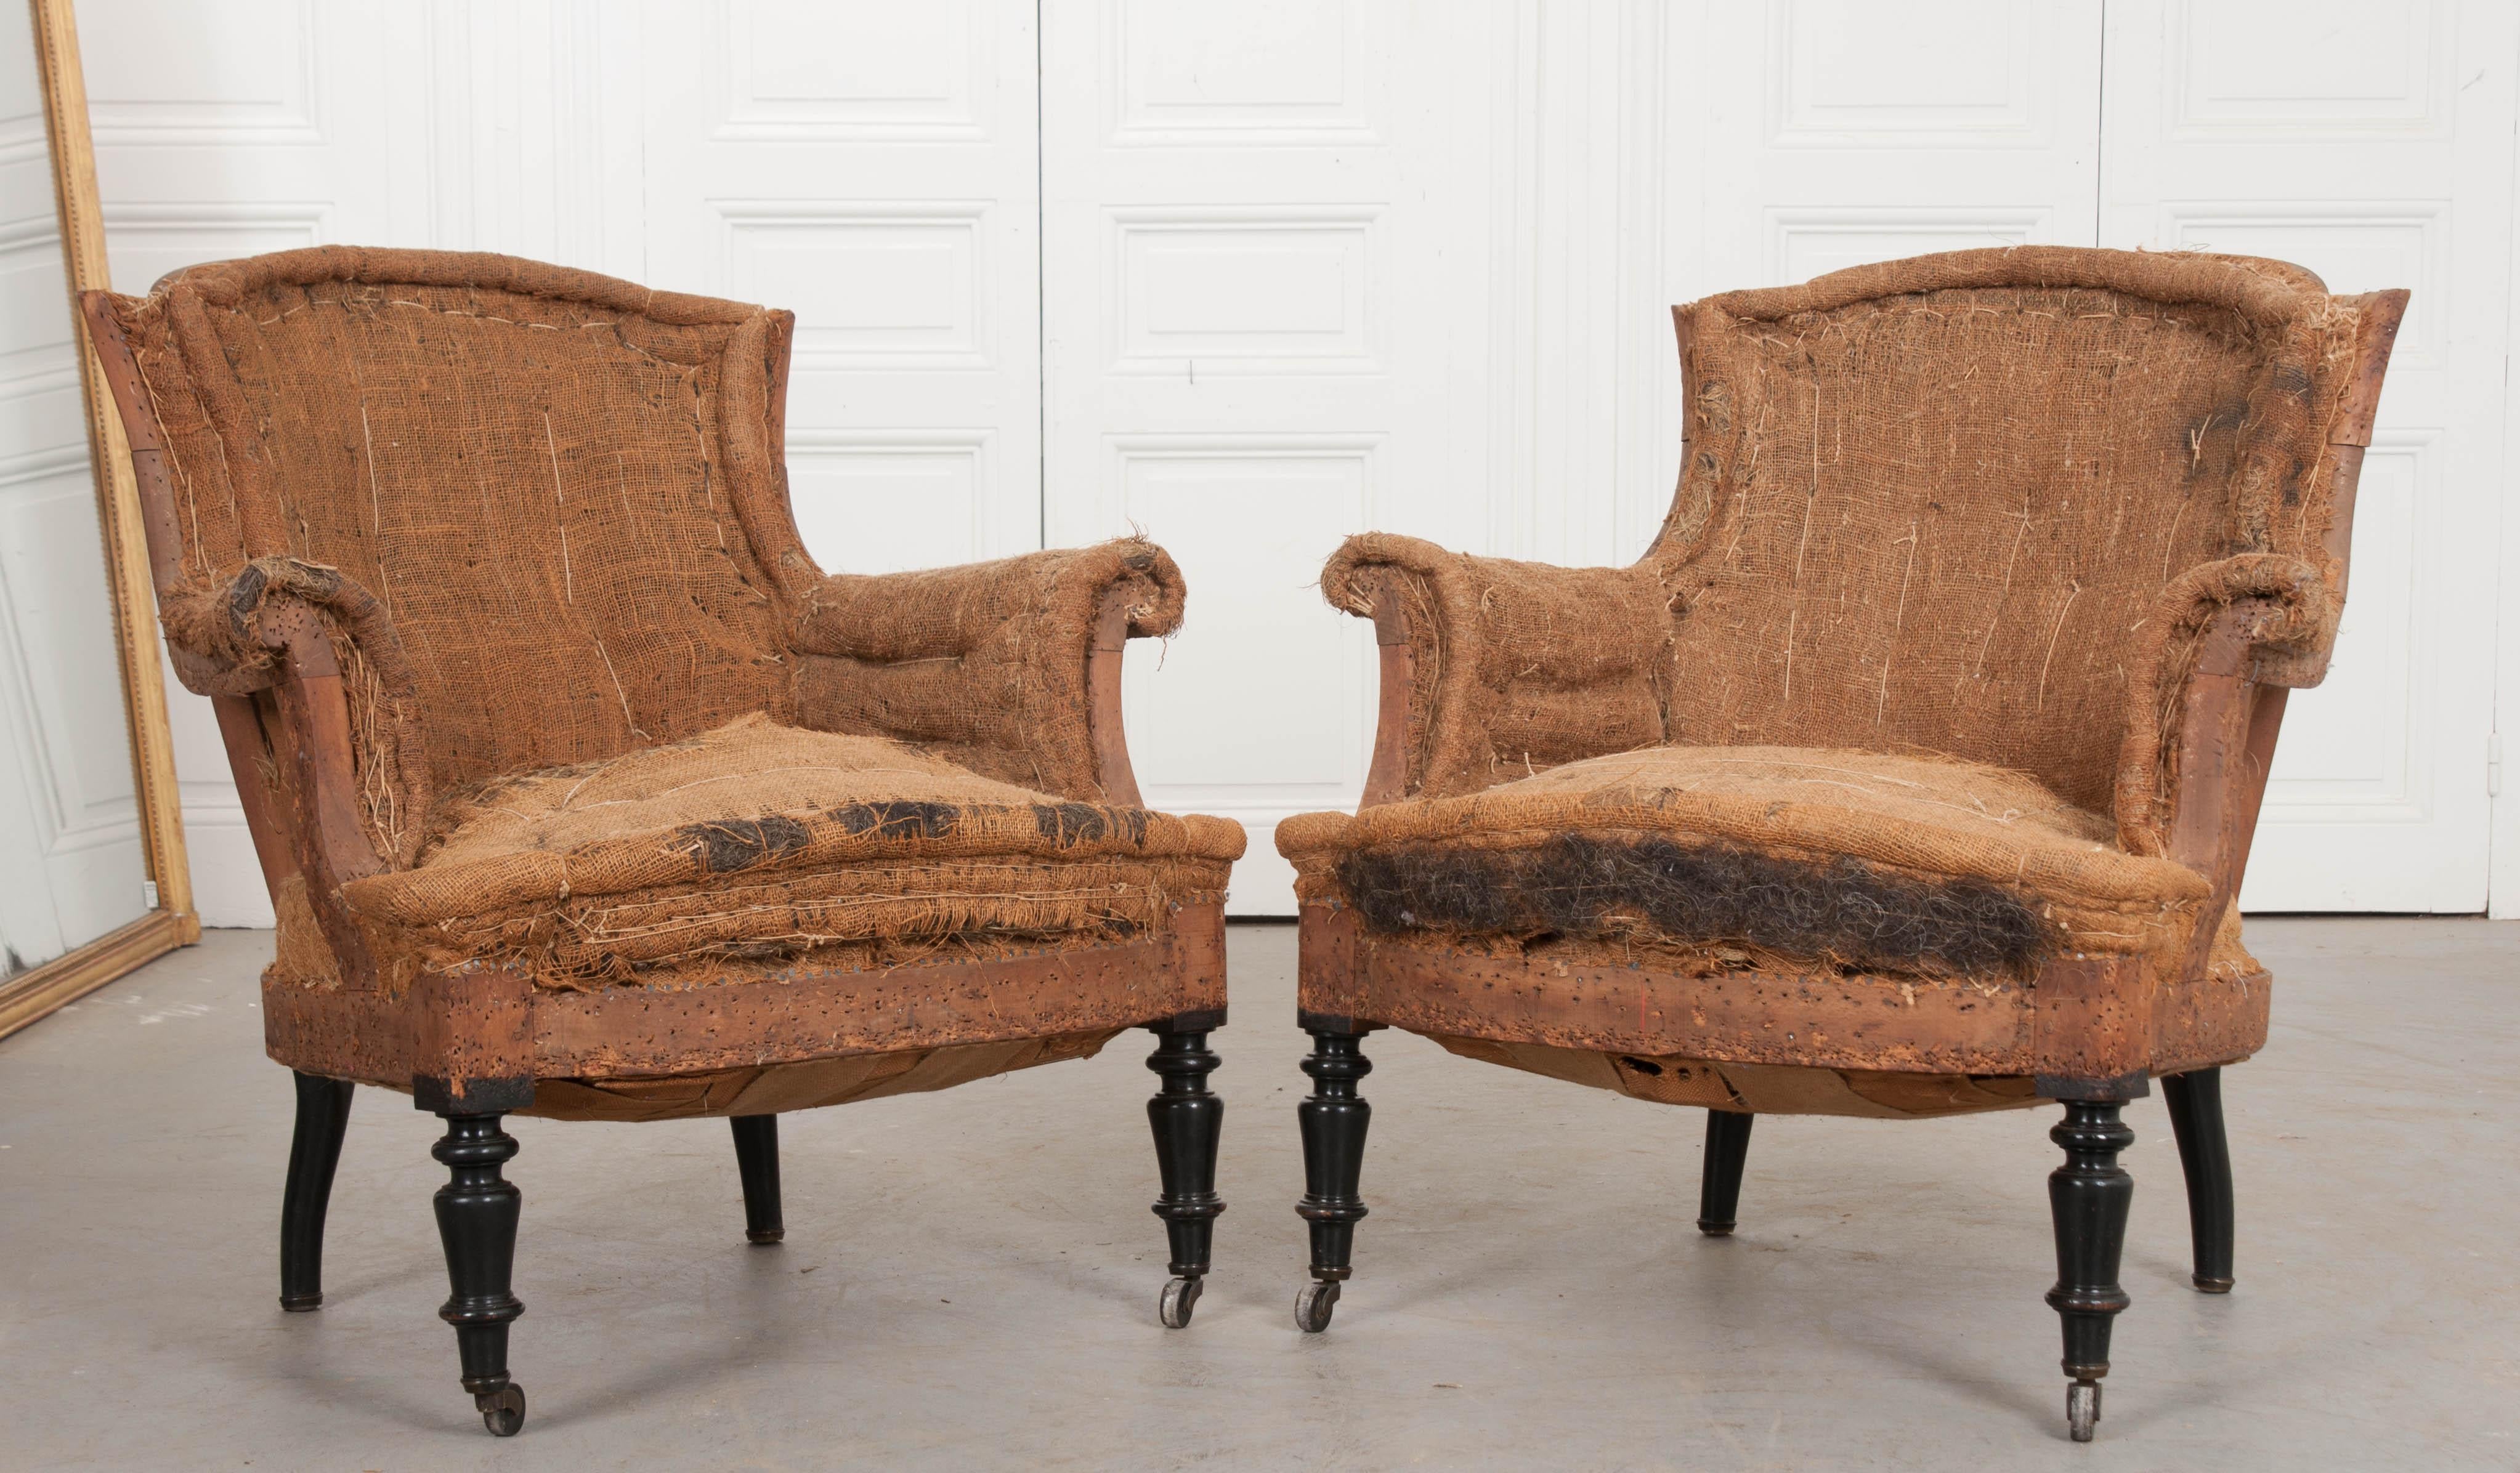 A fantastic pair of structured armchairs, not upholstered, from 19th century France. The pair have a shapely form, with rolled arms and styled back. The chairs are lifted by four ebonized legs, of which the front two have been wonderfully turned and